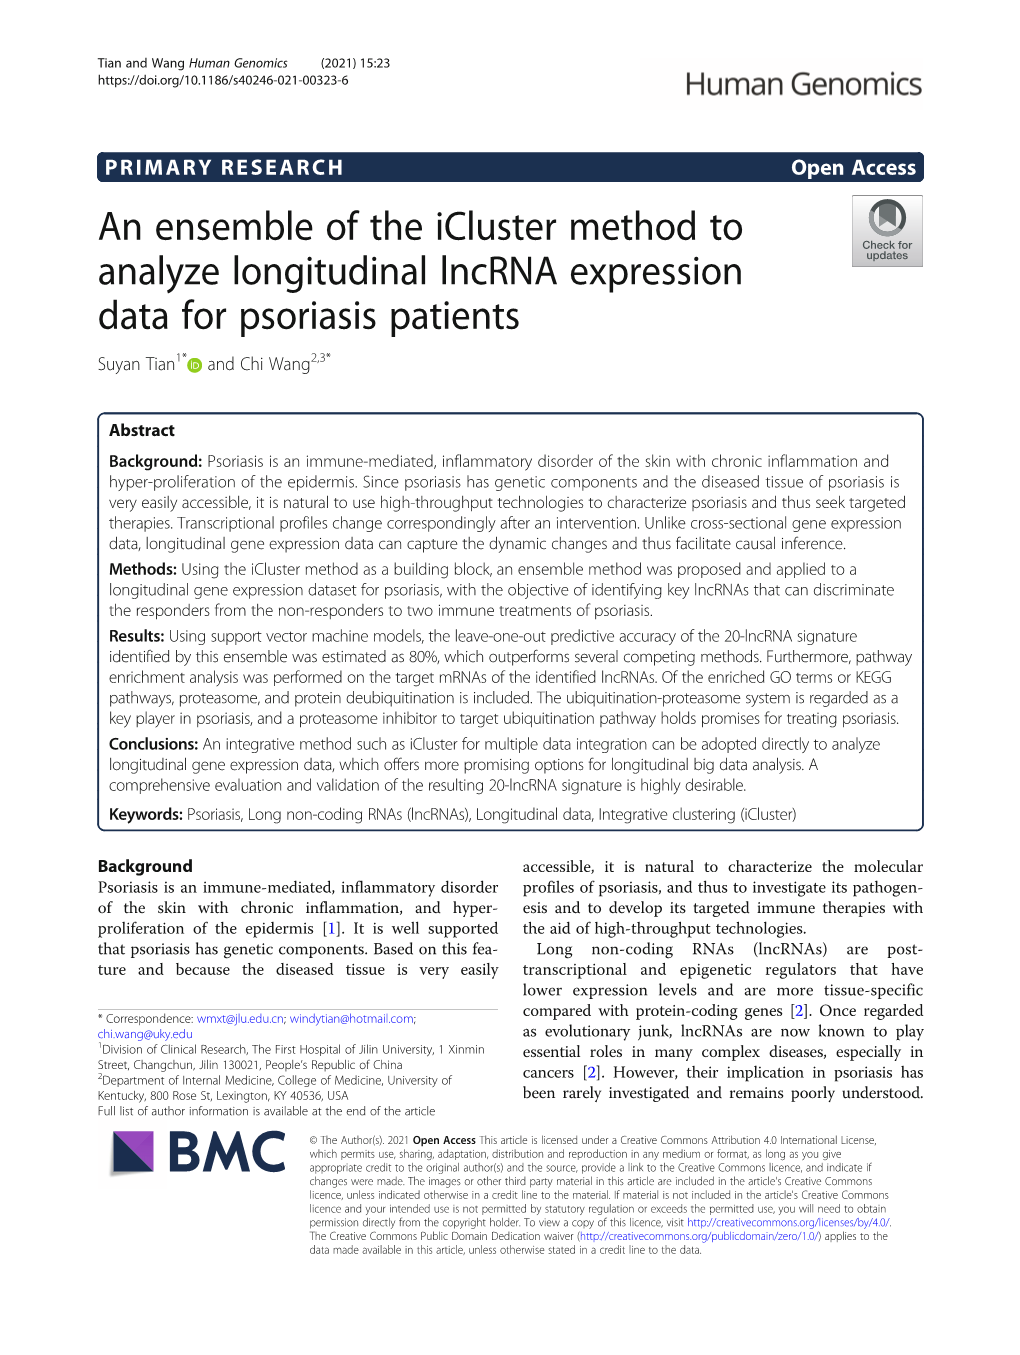 An Ensemble of the Icluster Method to Analyze Longitudinal Lncrna Expression Data for Psoriasis Patients Suyan Tian1* and Chi Wang2,3*